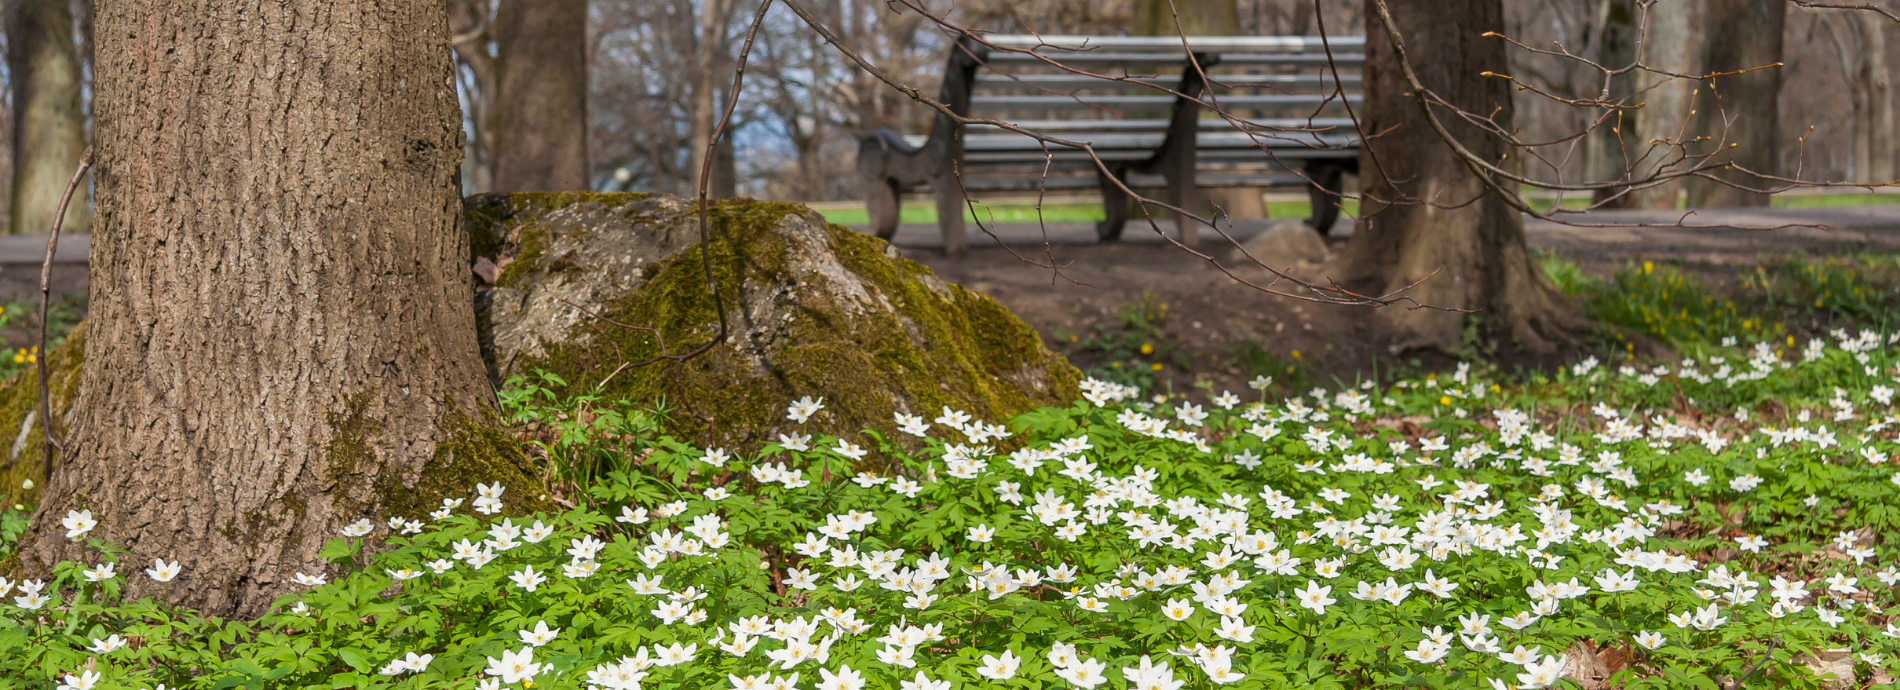 bench surrounded by anemones under a tree in springtime 